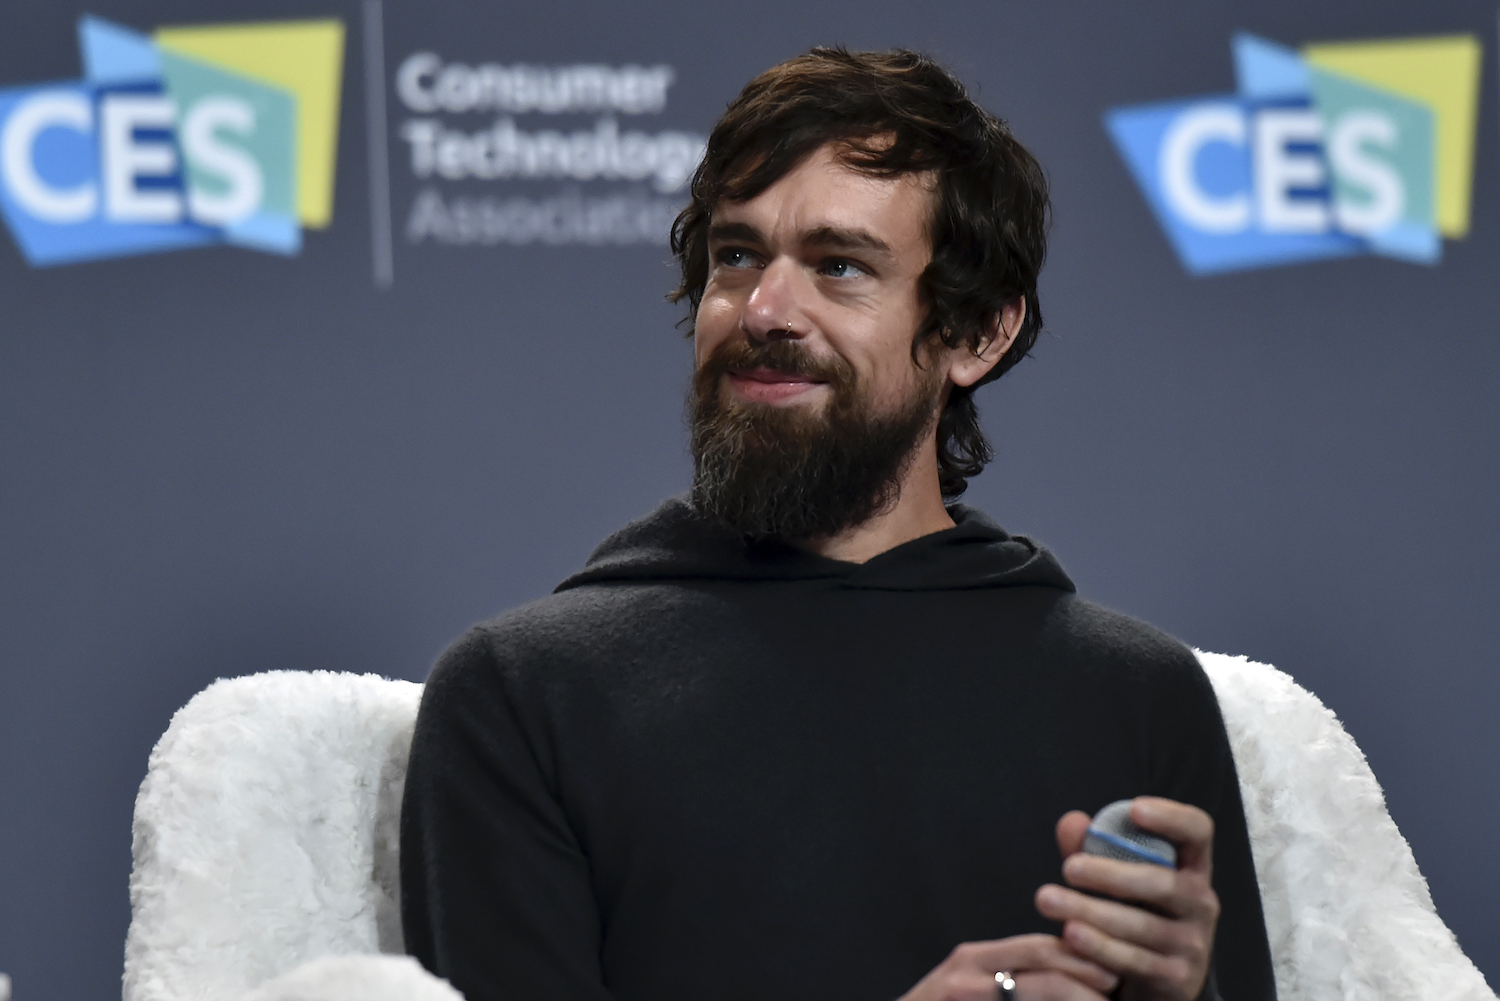 Twitter CEO Jack Dorsey at CES 2019